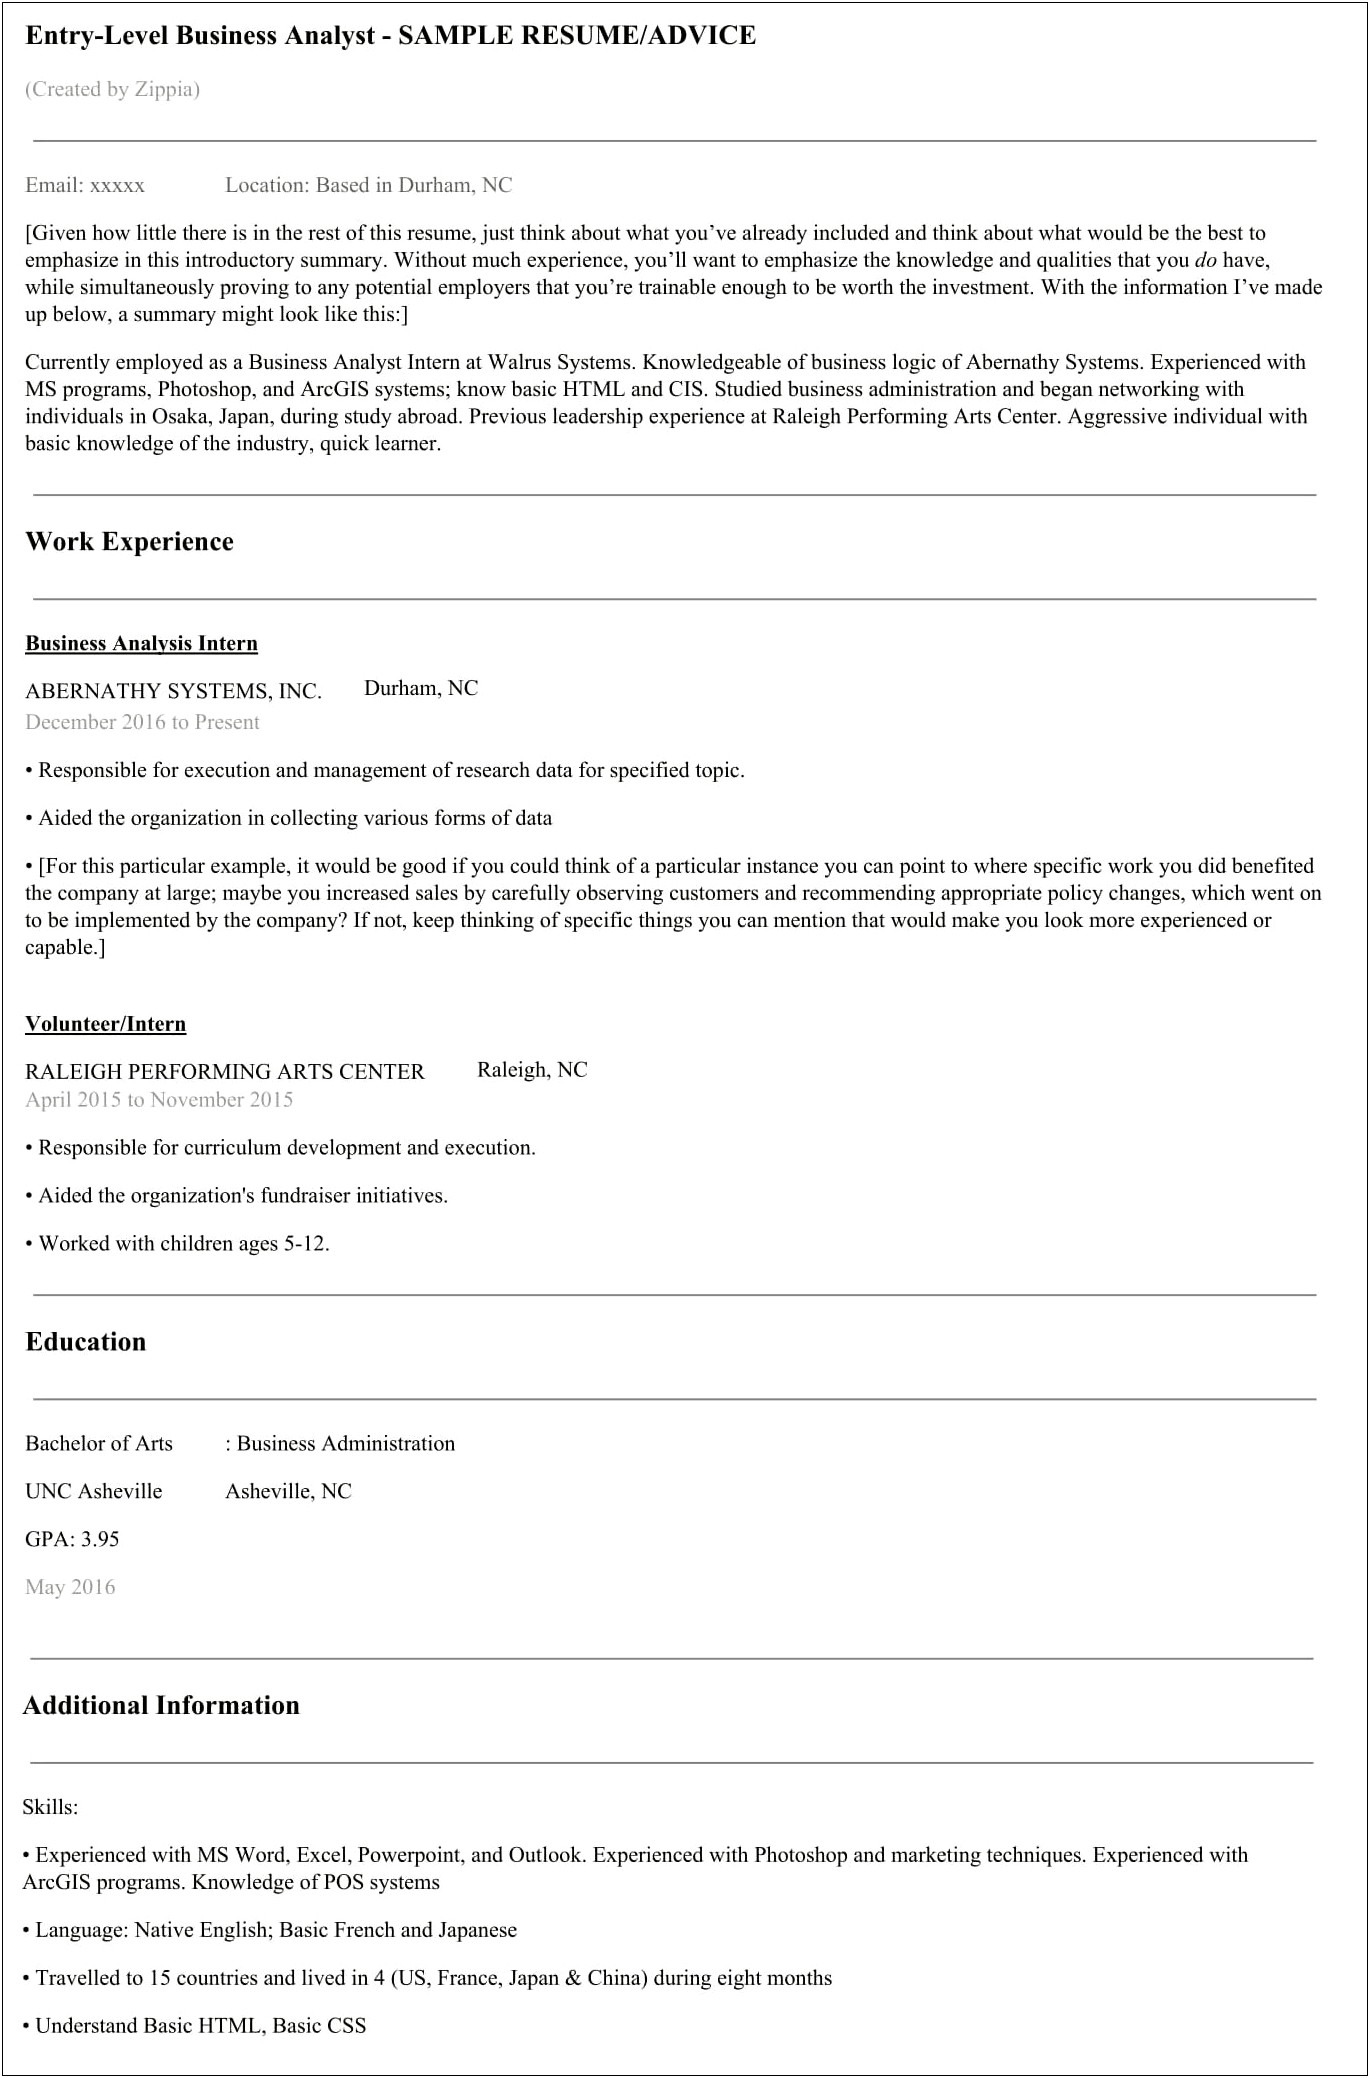 Sample Business Analyst Resumes Entry Level